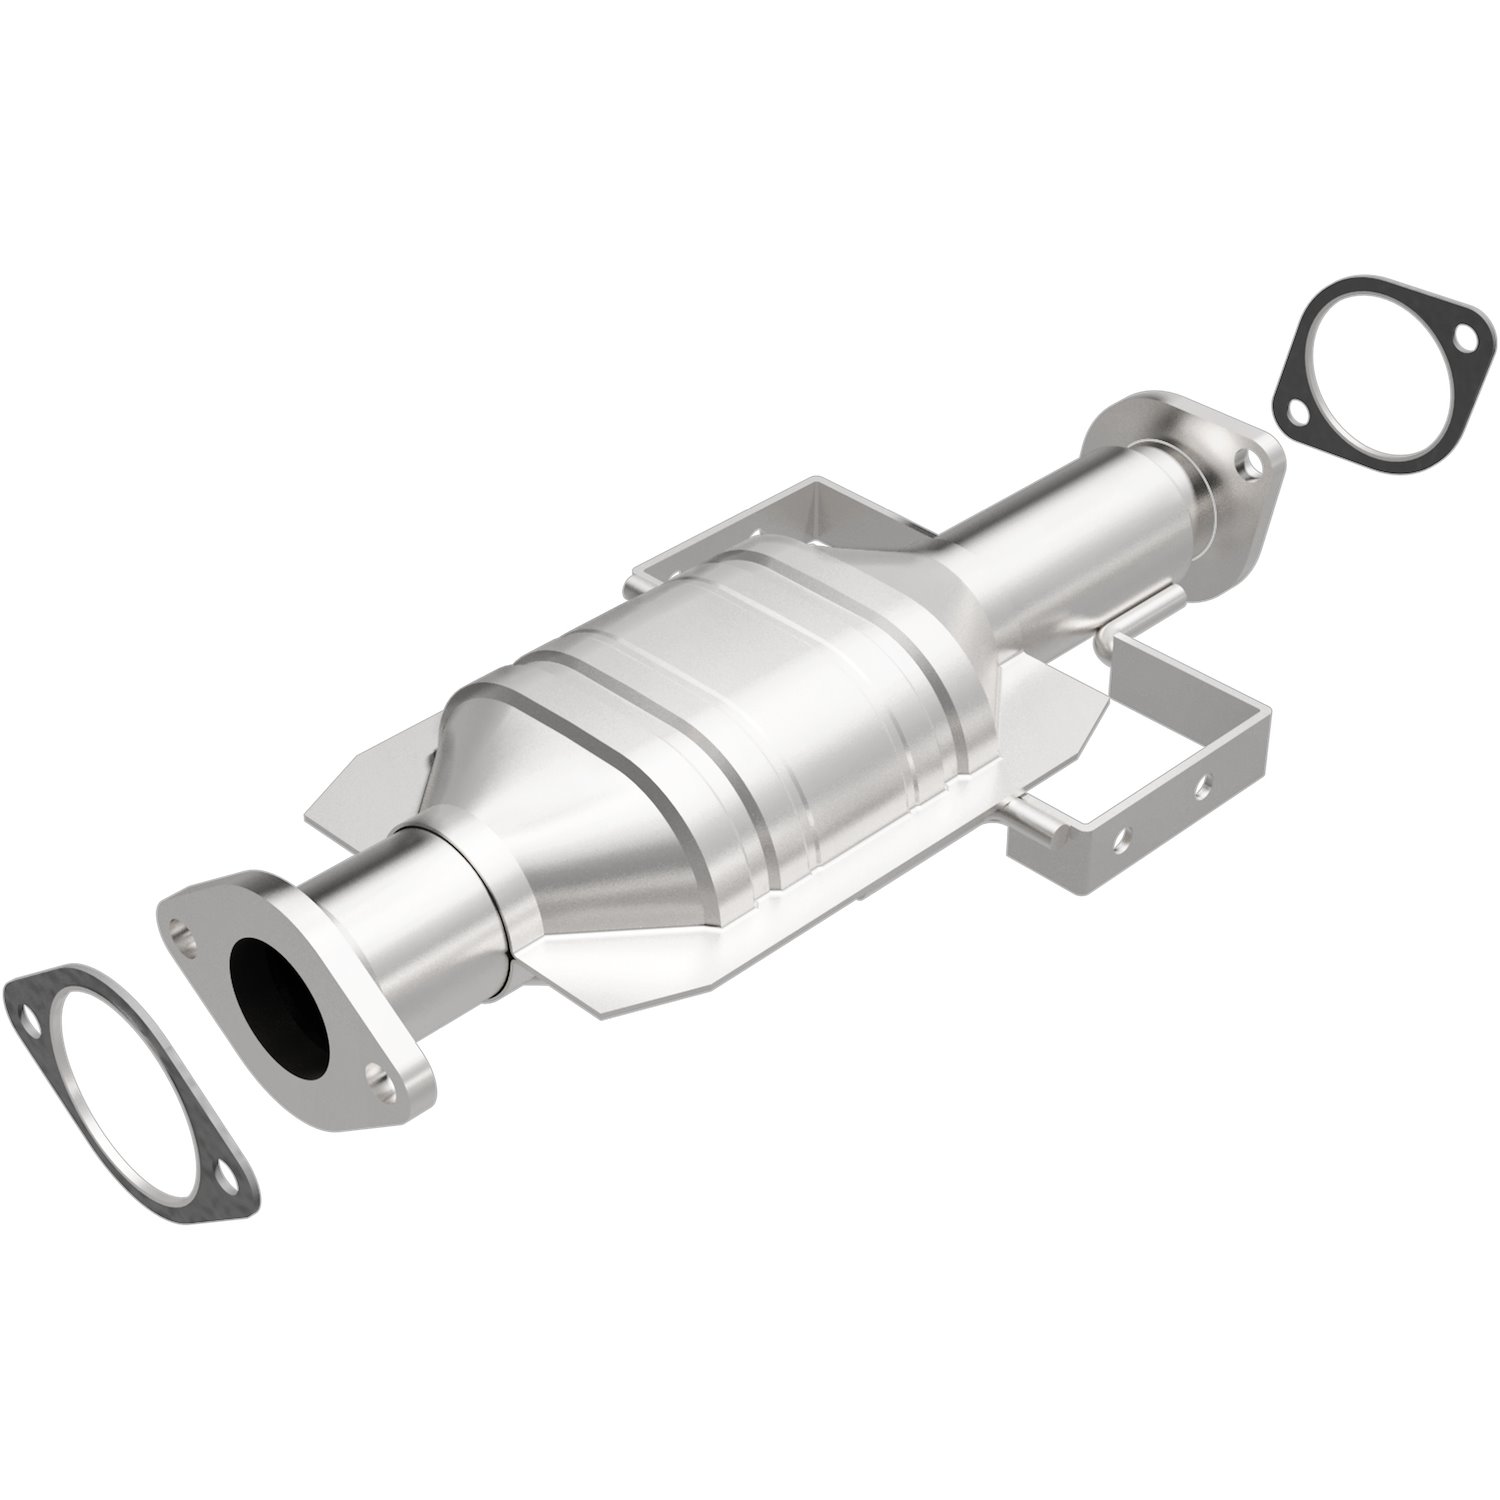 California Grade CARB Compliant Direct-Fit Catalytic Converter 338243